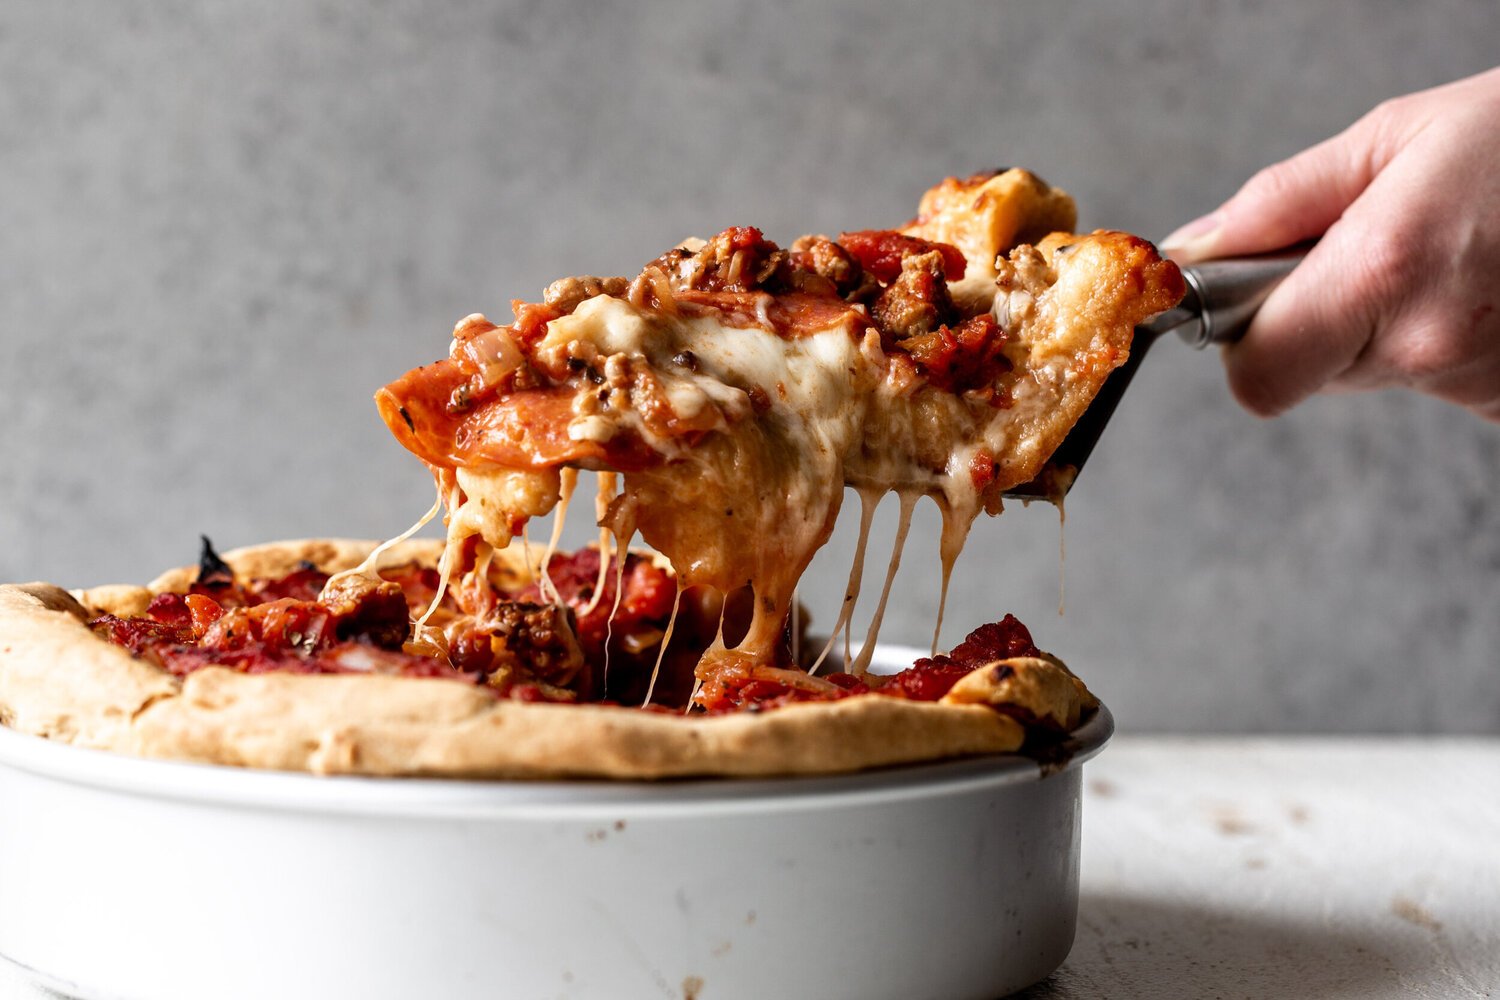 Chicago-Style Deep Dish Pizza with Sausage &amp; Pepperoni